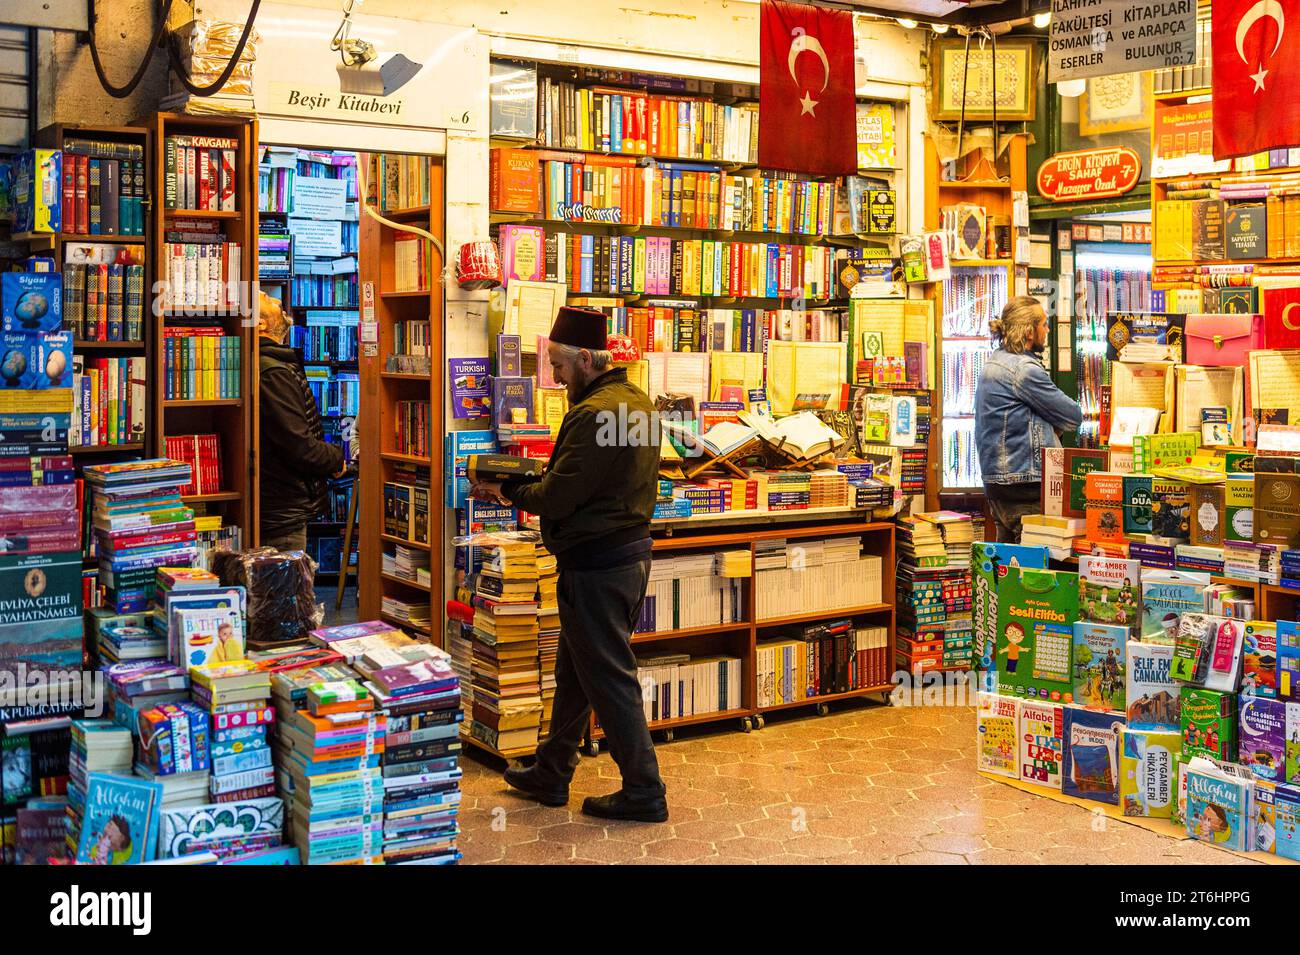 Turkey, Istanbul, Old town, Old book market Stock Photo